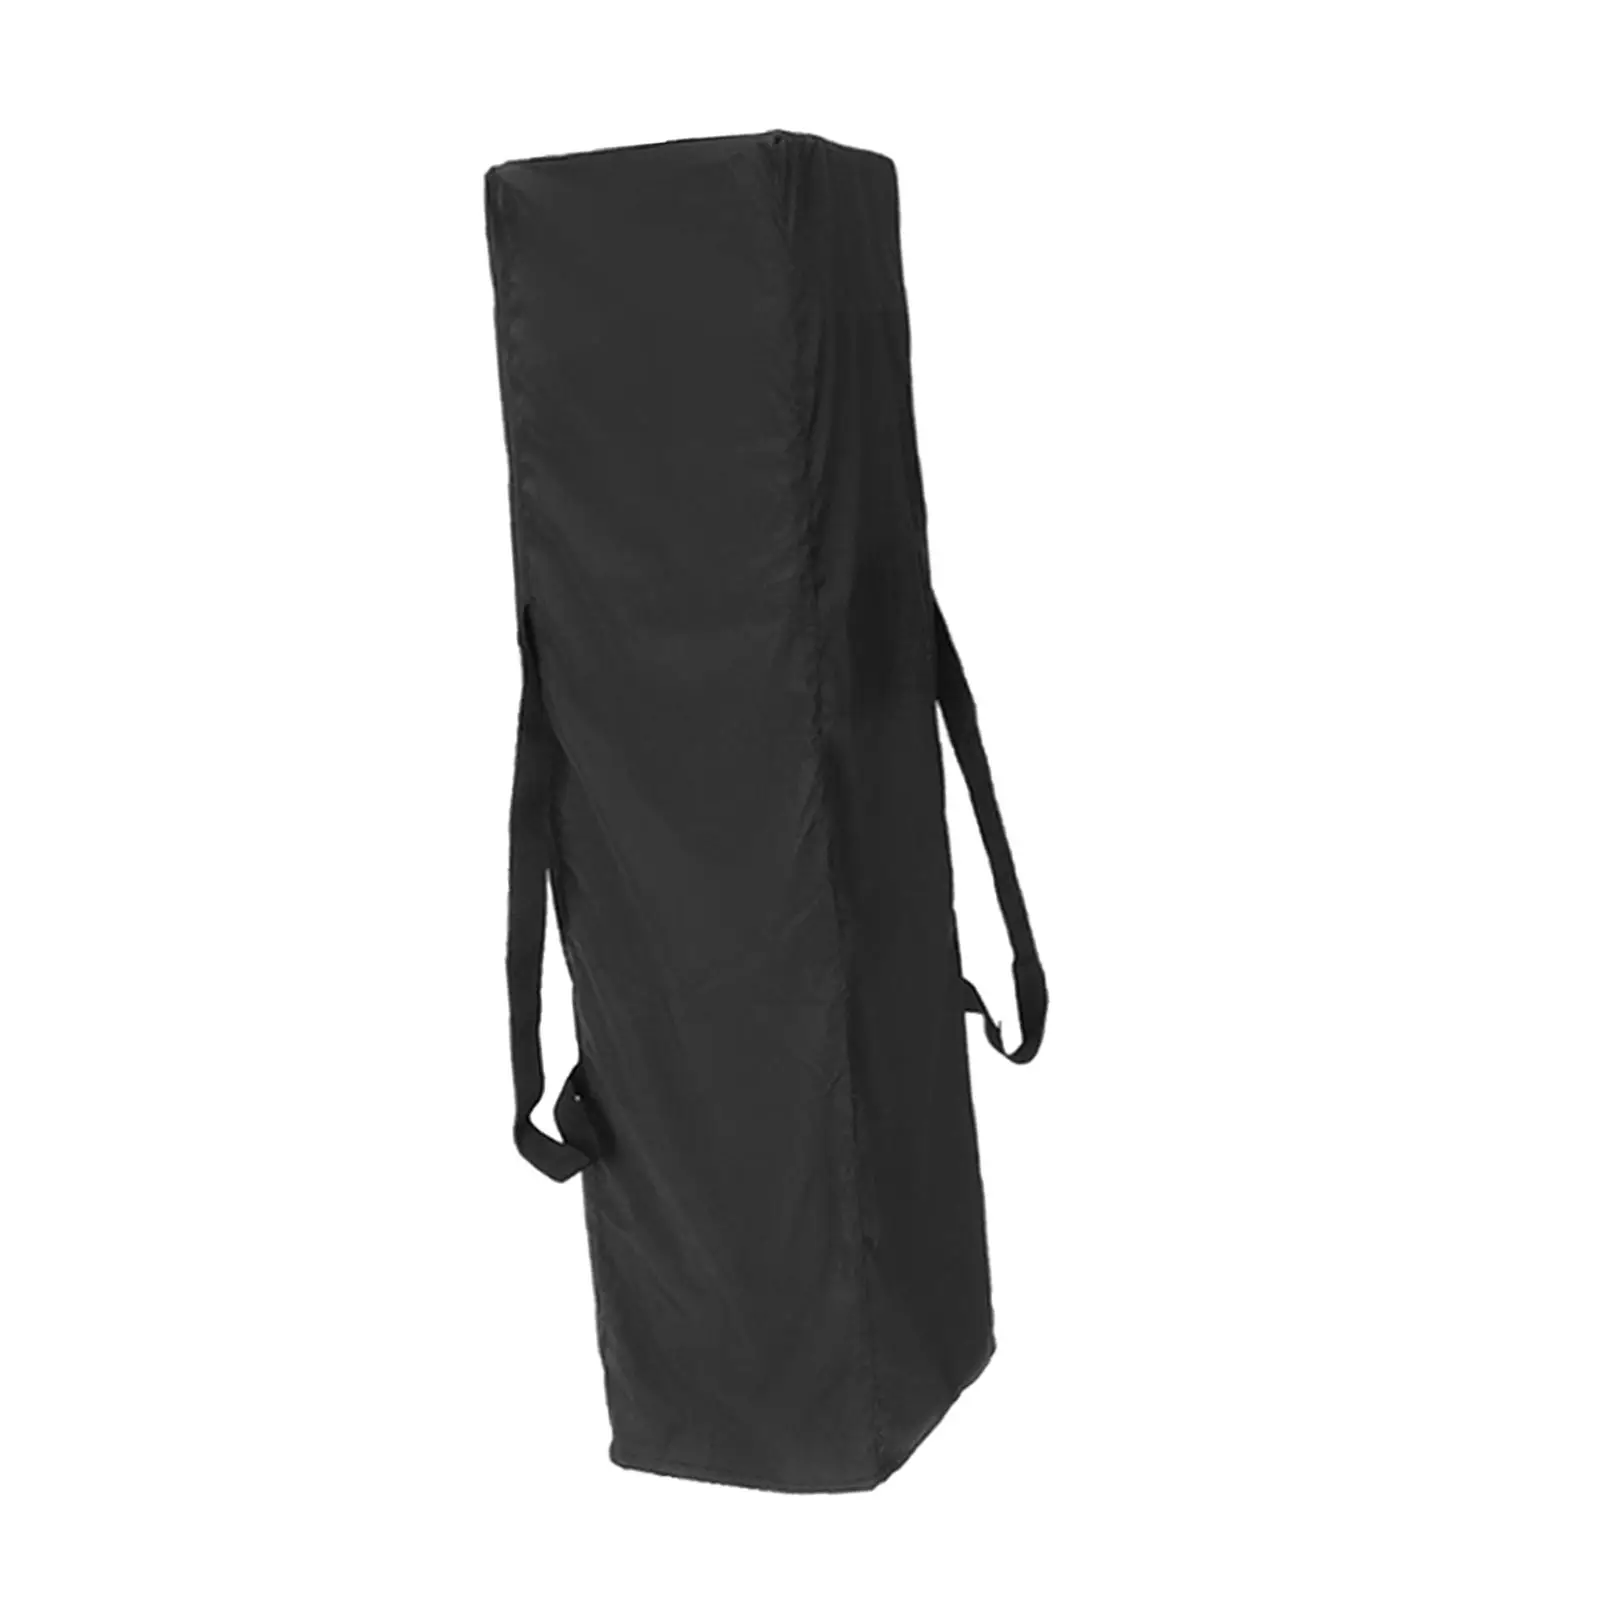 3 Sizes Portable Canvas Bag with Zipper Folding Bag Duffel Travel Sports Equipment Bags Large-space Tent Carrying Bags